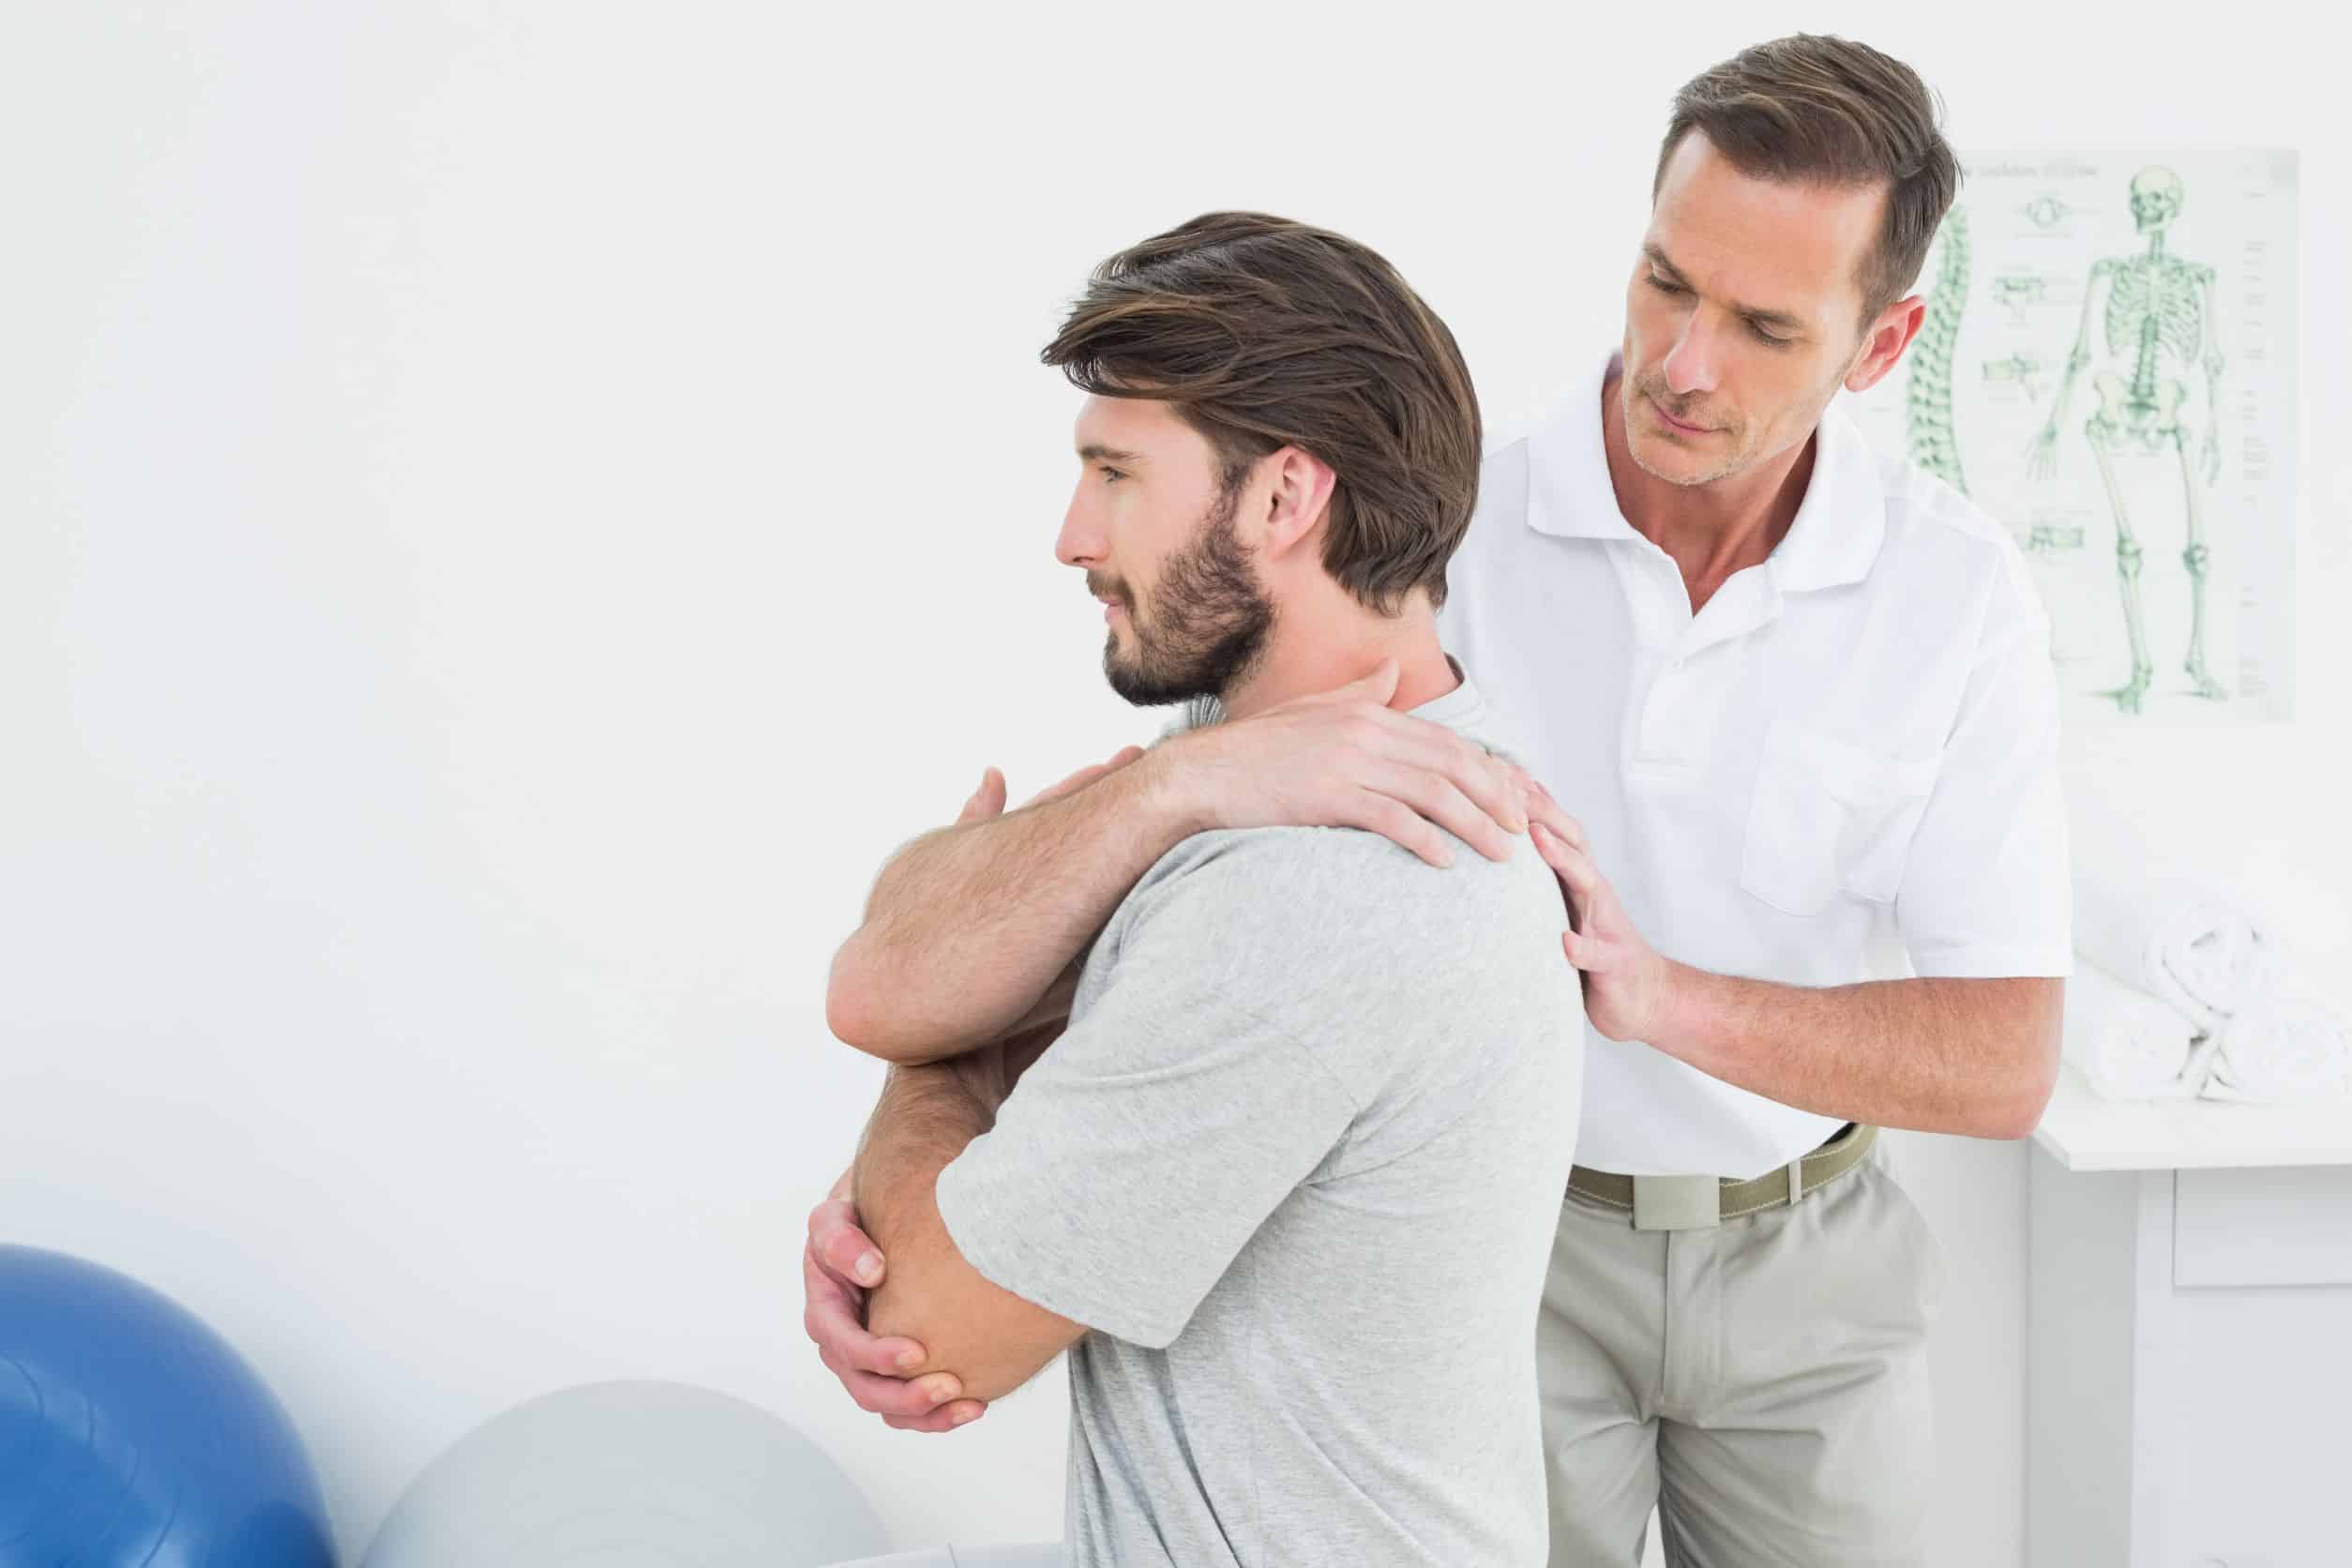 Chiropractic care adjustments being performed by a chiropractor in a male patient’s shoulder and upper back.